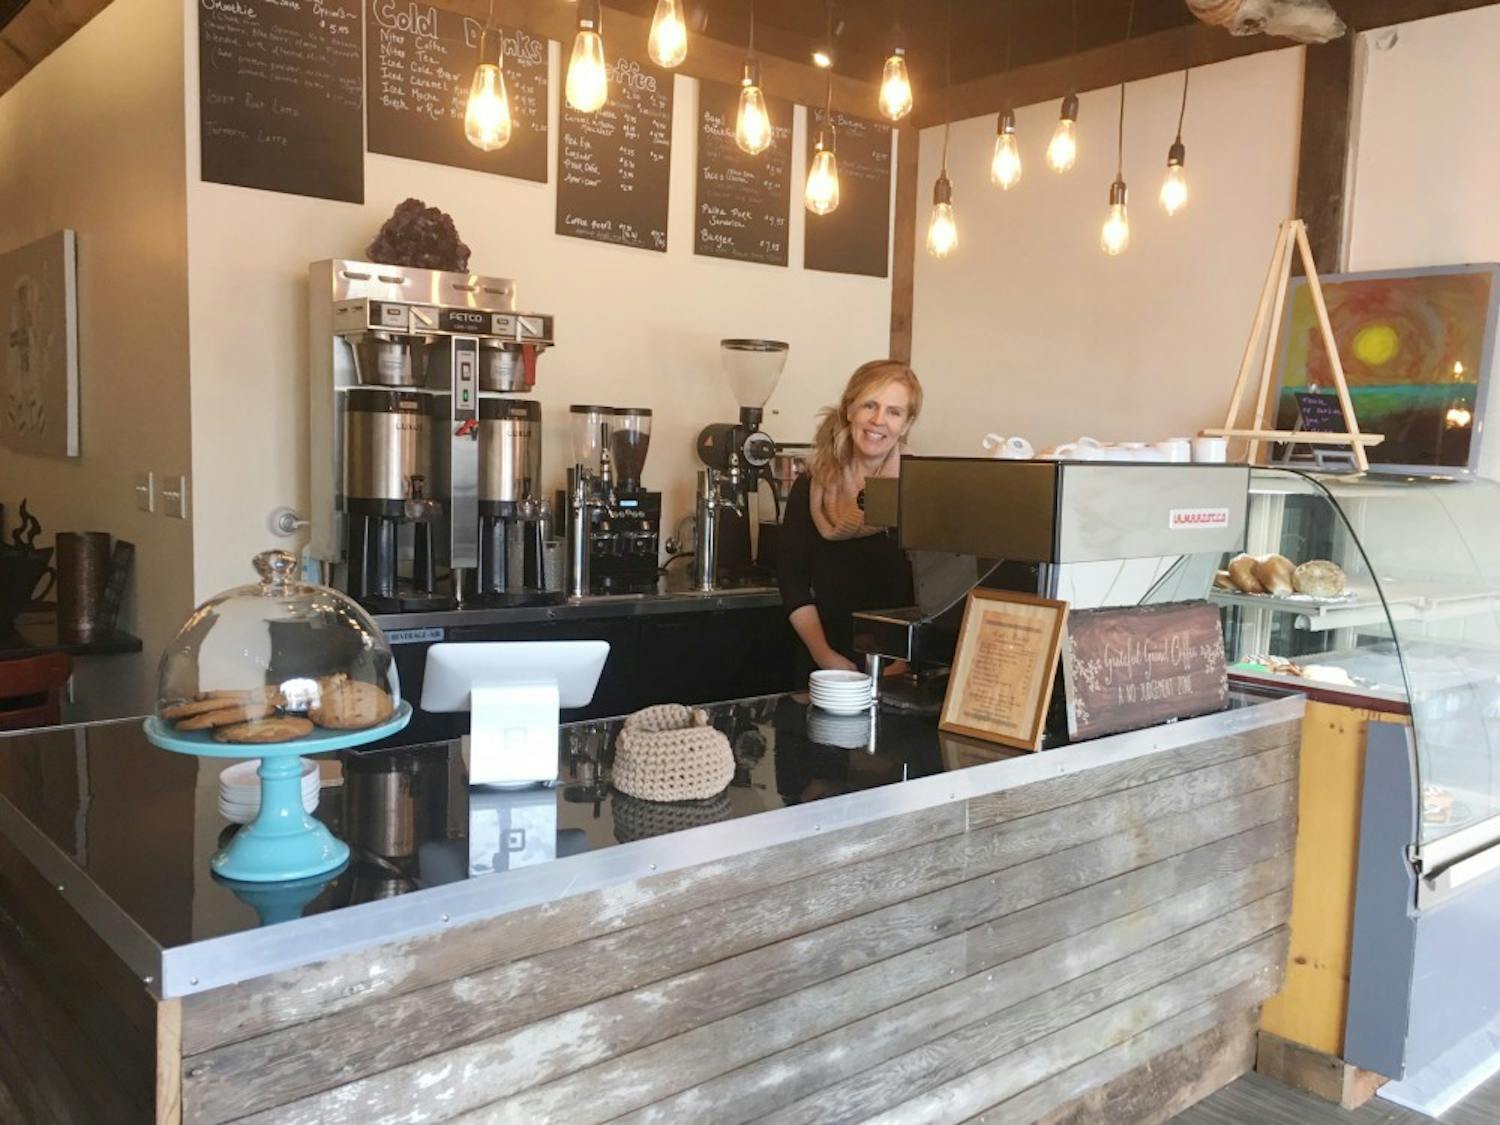 Angela Kunz (pictured) opened Grateful Grind Coffee with her husband in early March. The coffee shop is located in the University Heights on&nbsp;Main Street.